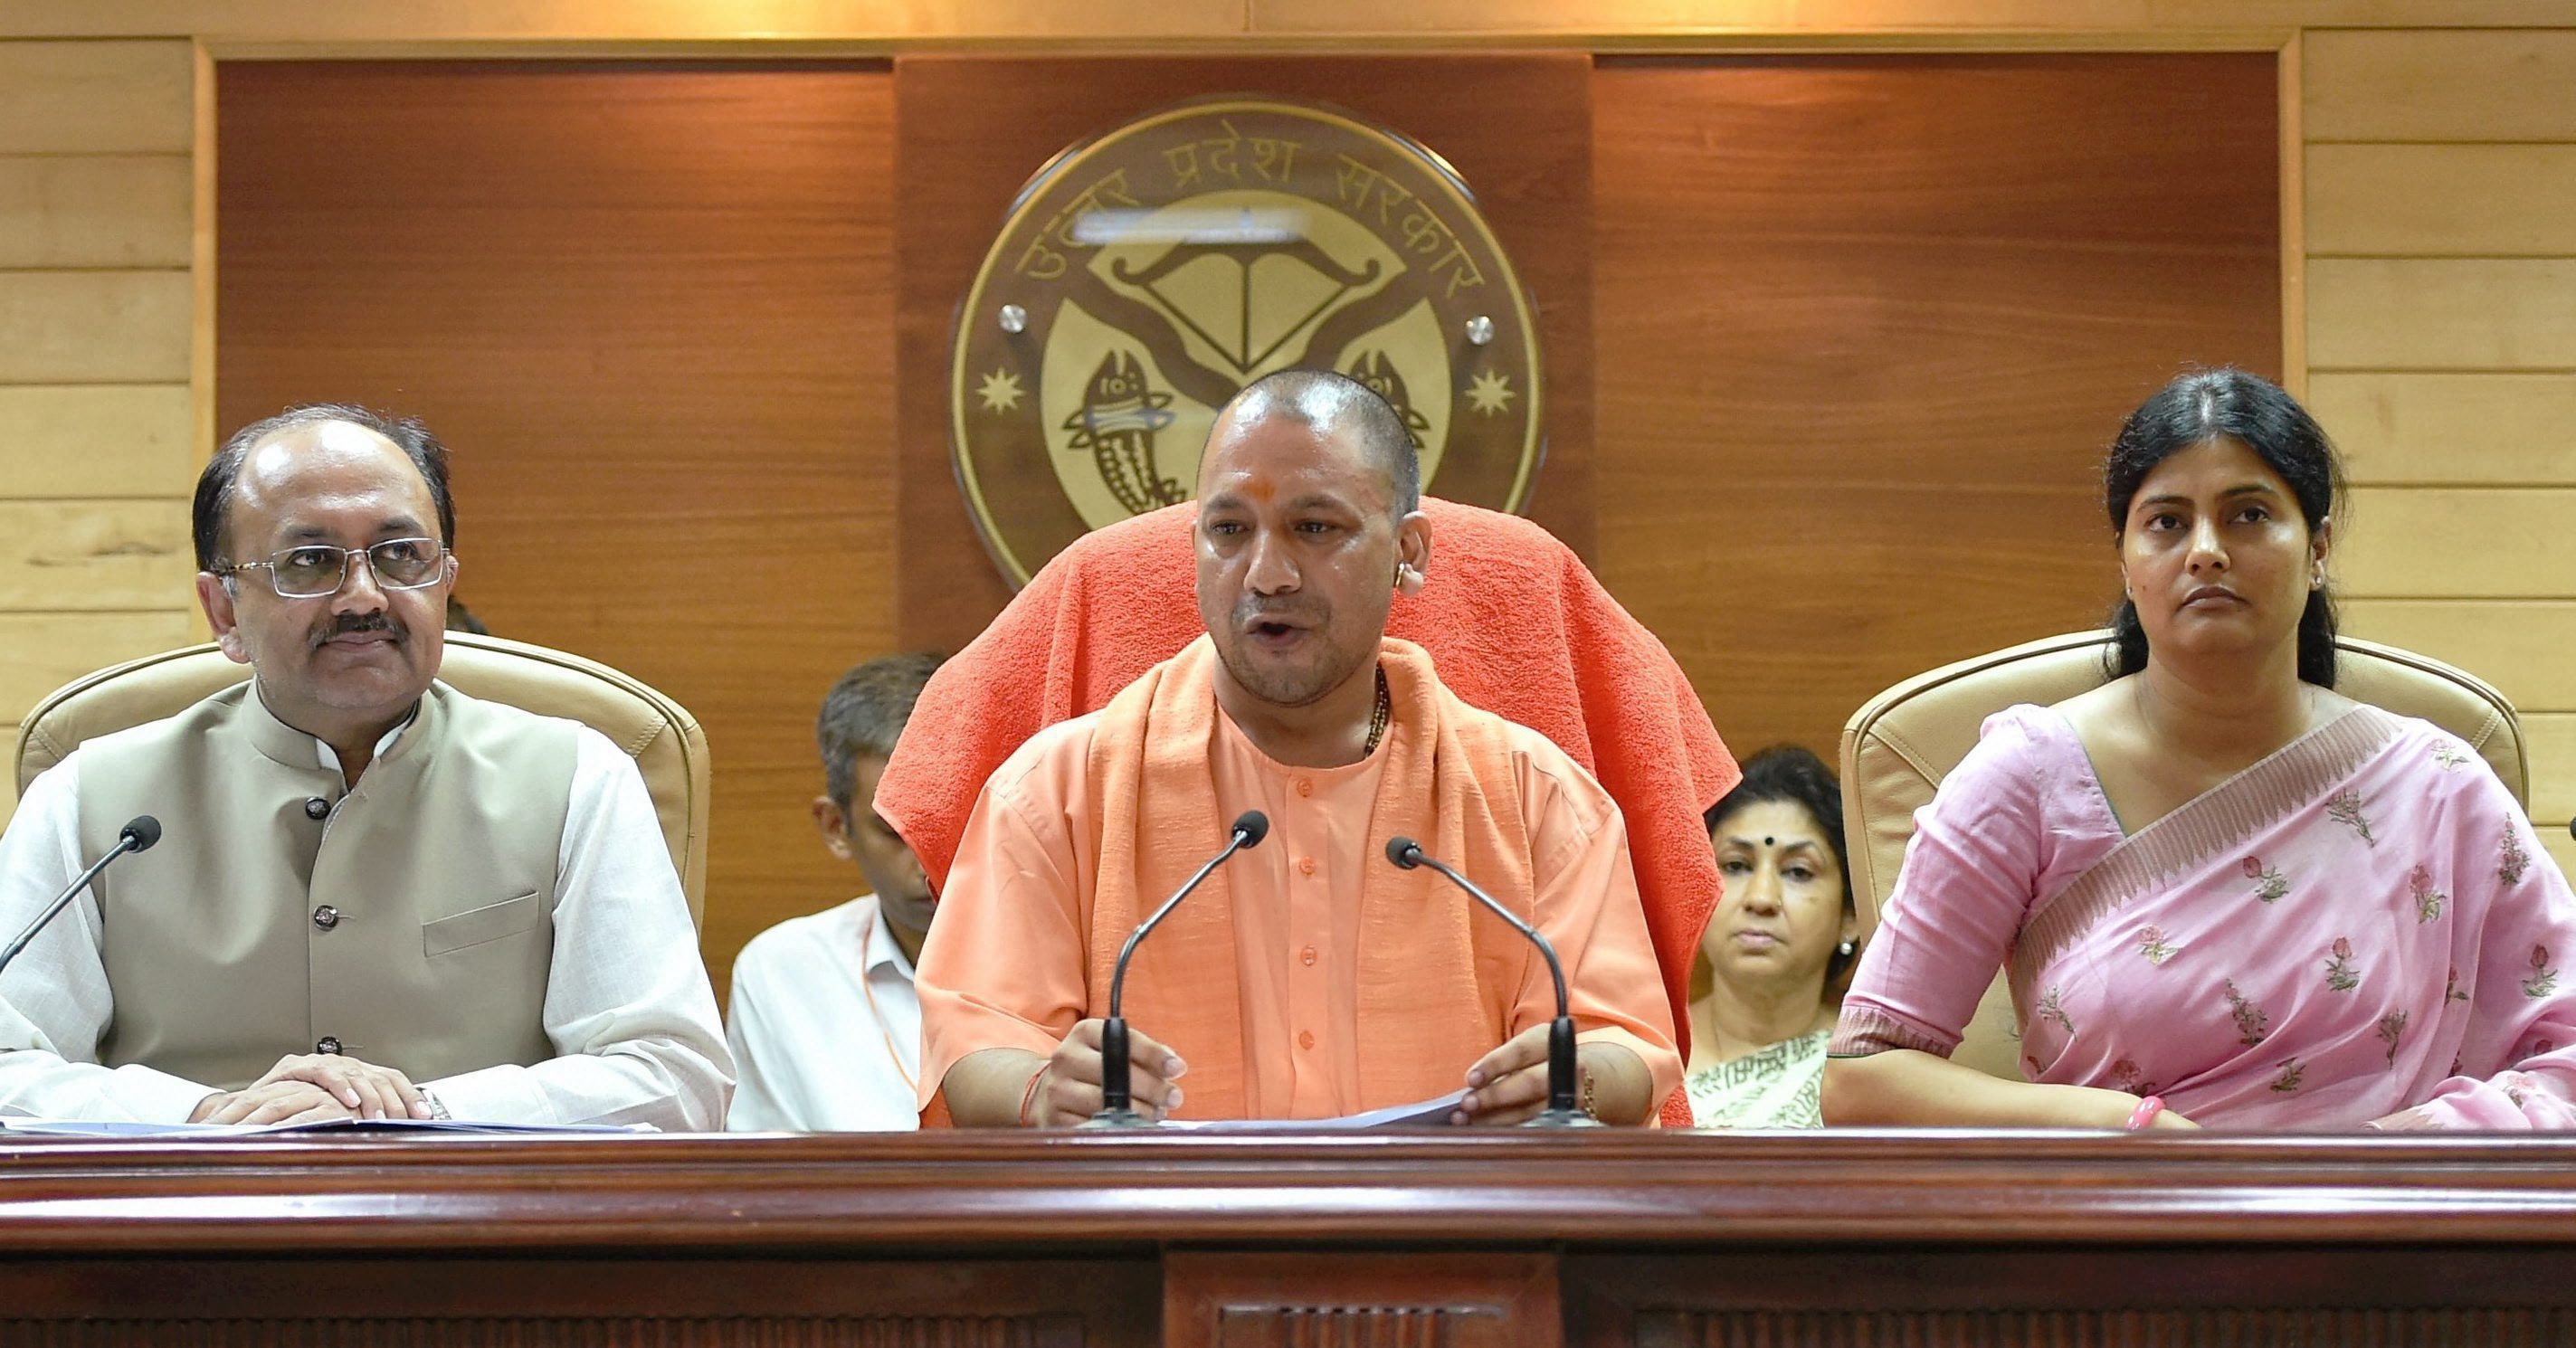 Lucknow: Uttar Pradesh Chief Minister Yogi Aditiyanath addressing a press conference in Lucknow on Saturday. Union Minister Anupriya Patel and Uttar Pradesh Health Minister Siddharth Nath Singh are also seen. PTI Photo by Nand Kumar (PTI8_12_2017_000138B)